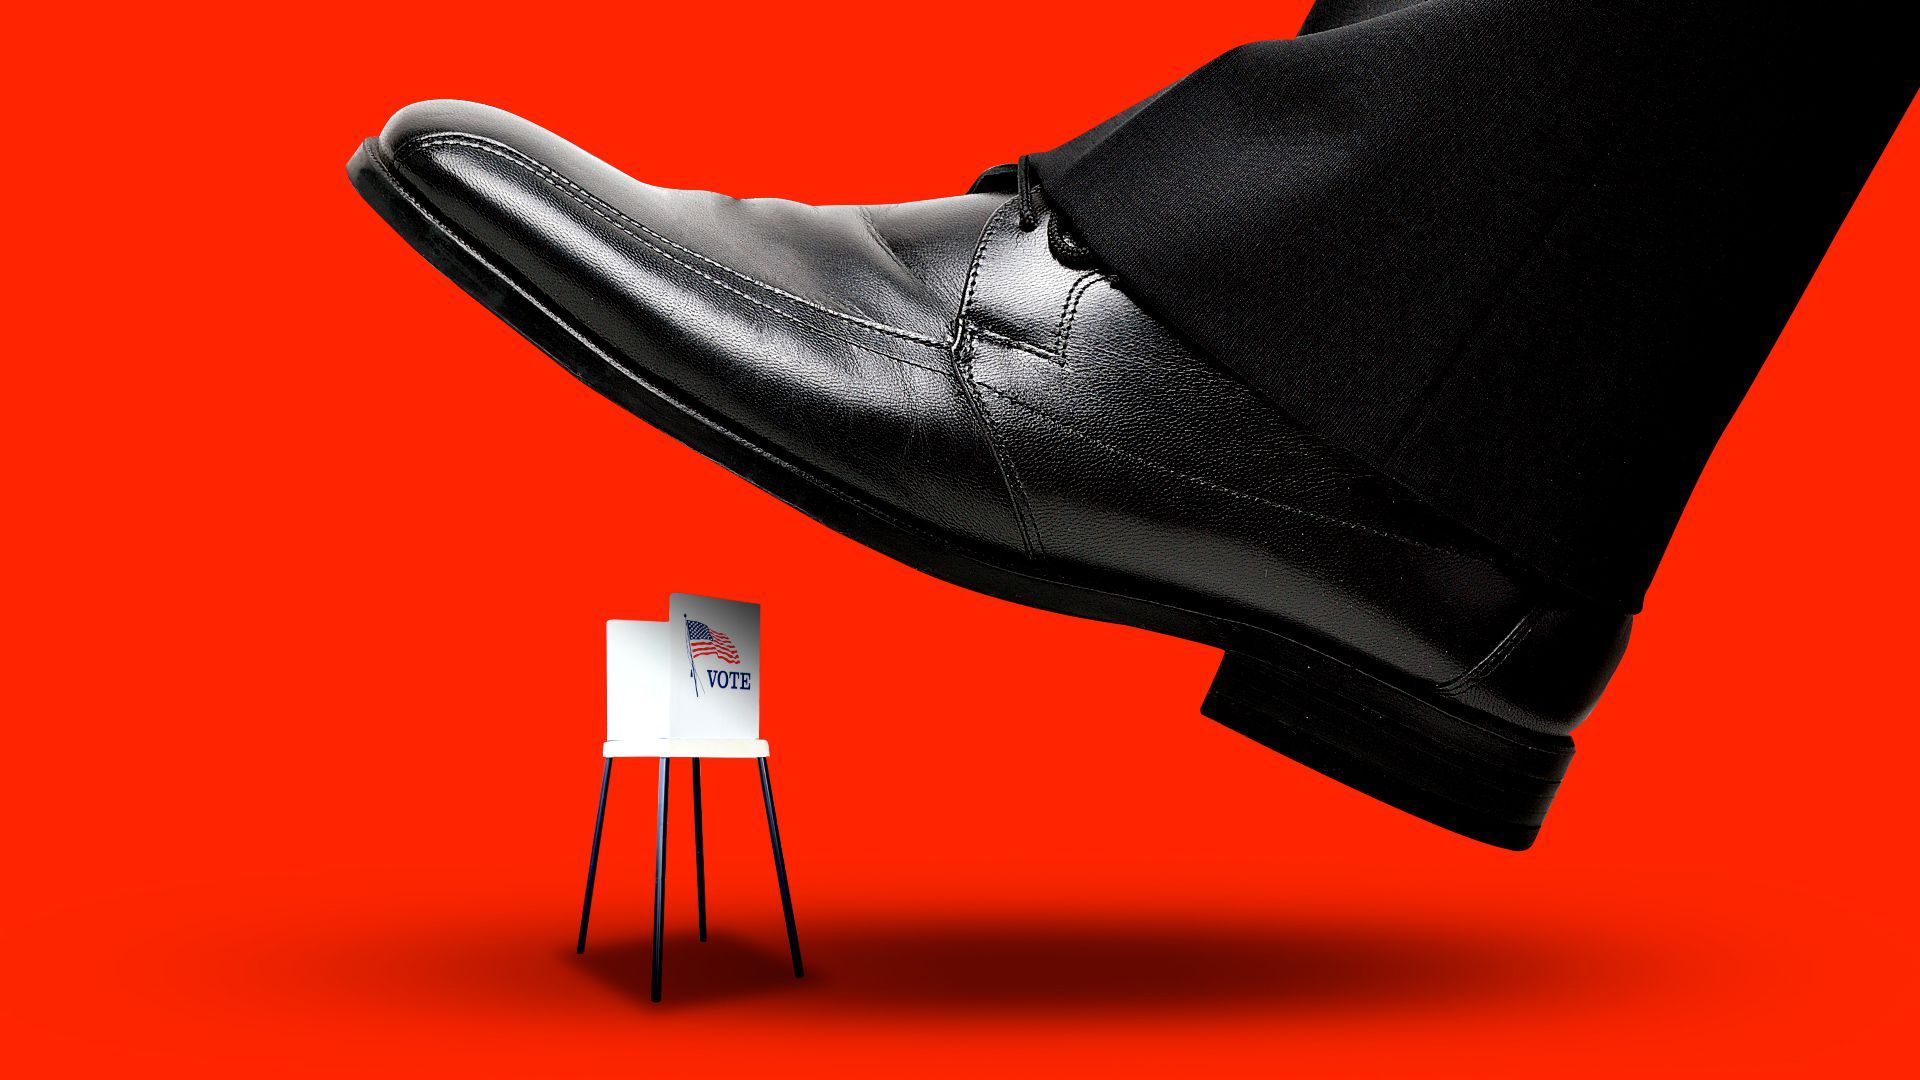 Illustration of a large shoe about to step on a tiny voting booth.